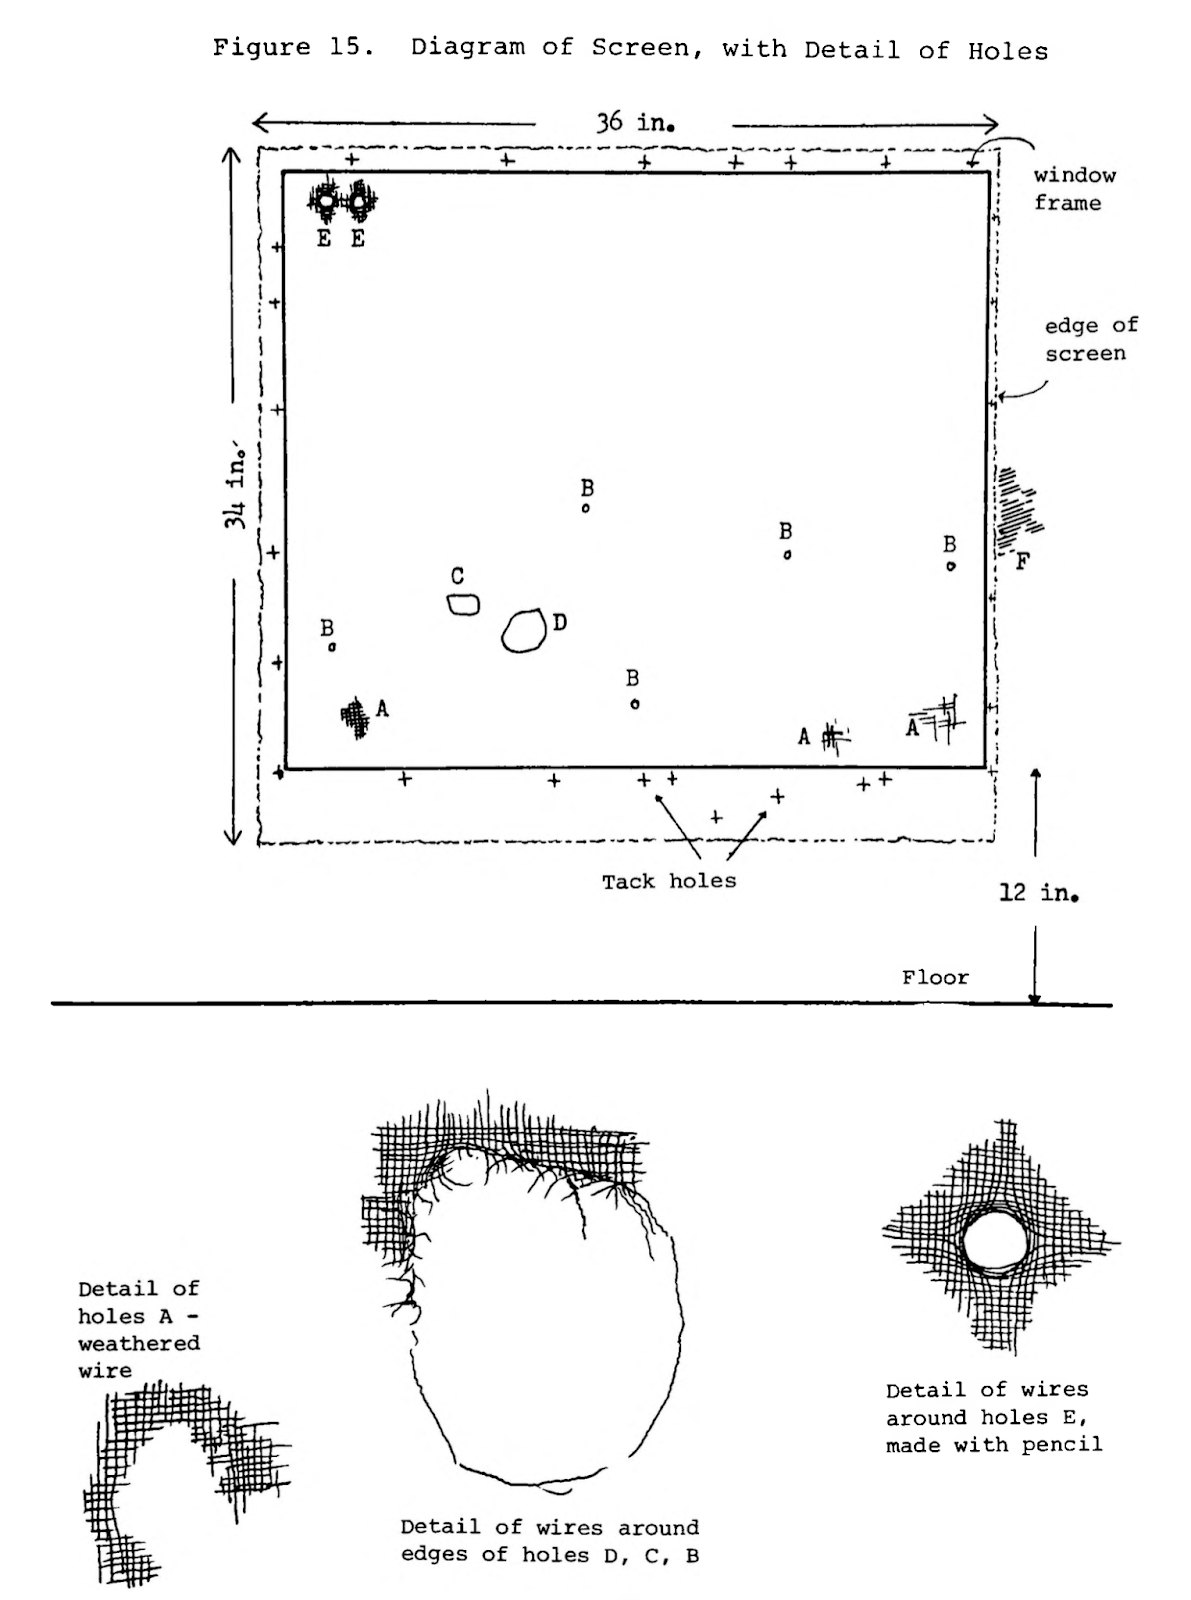 A drawing of the windows with drawings of how the holes looked. 

(Use under fair dealing for analysis)